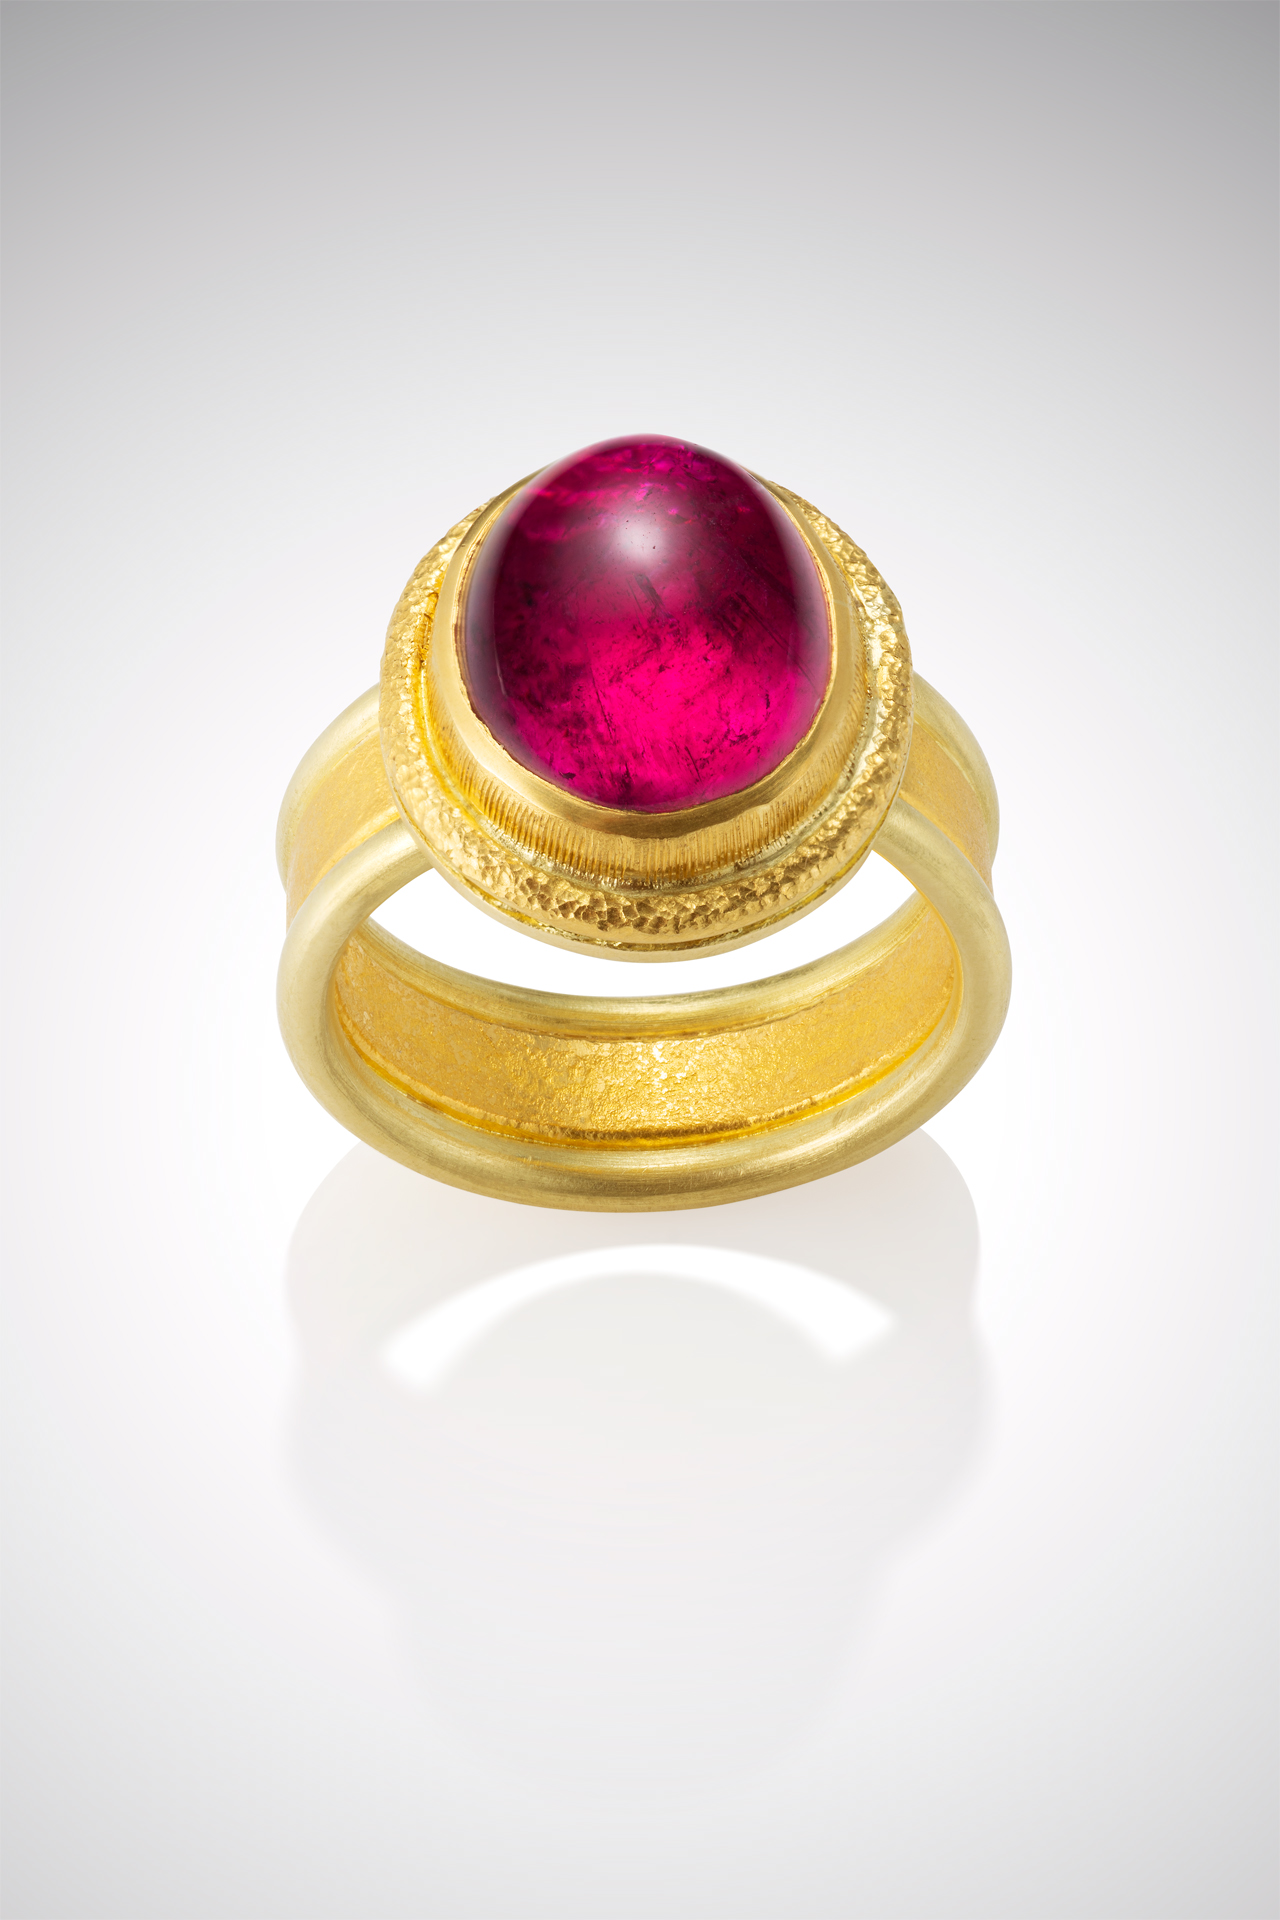 Hot Pink Agate Stone Ring - Hello Supply Modern Jewelry